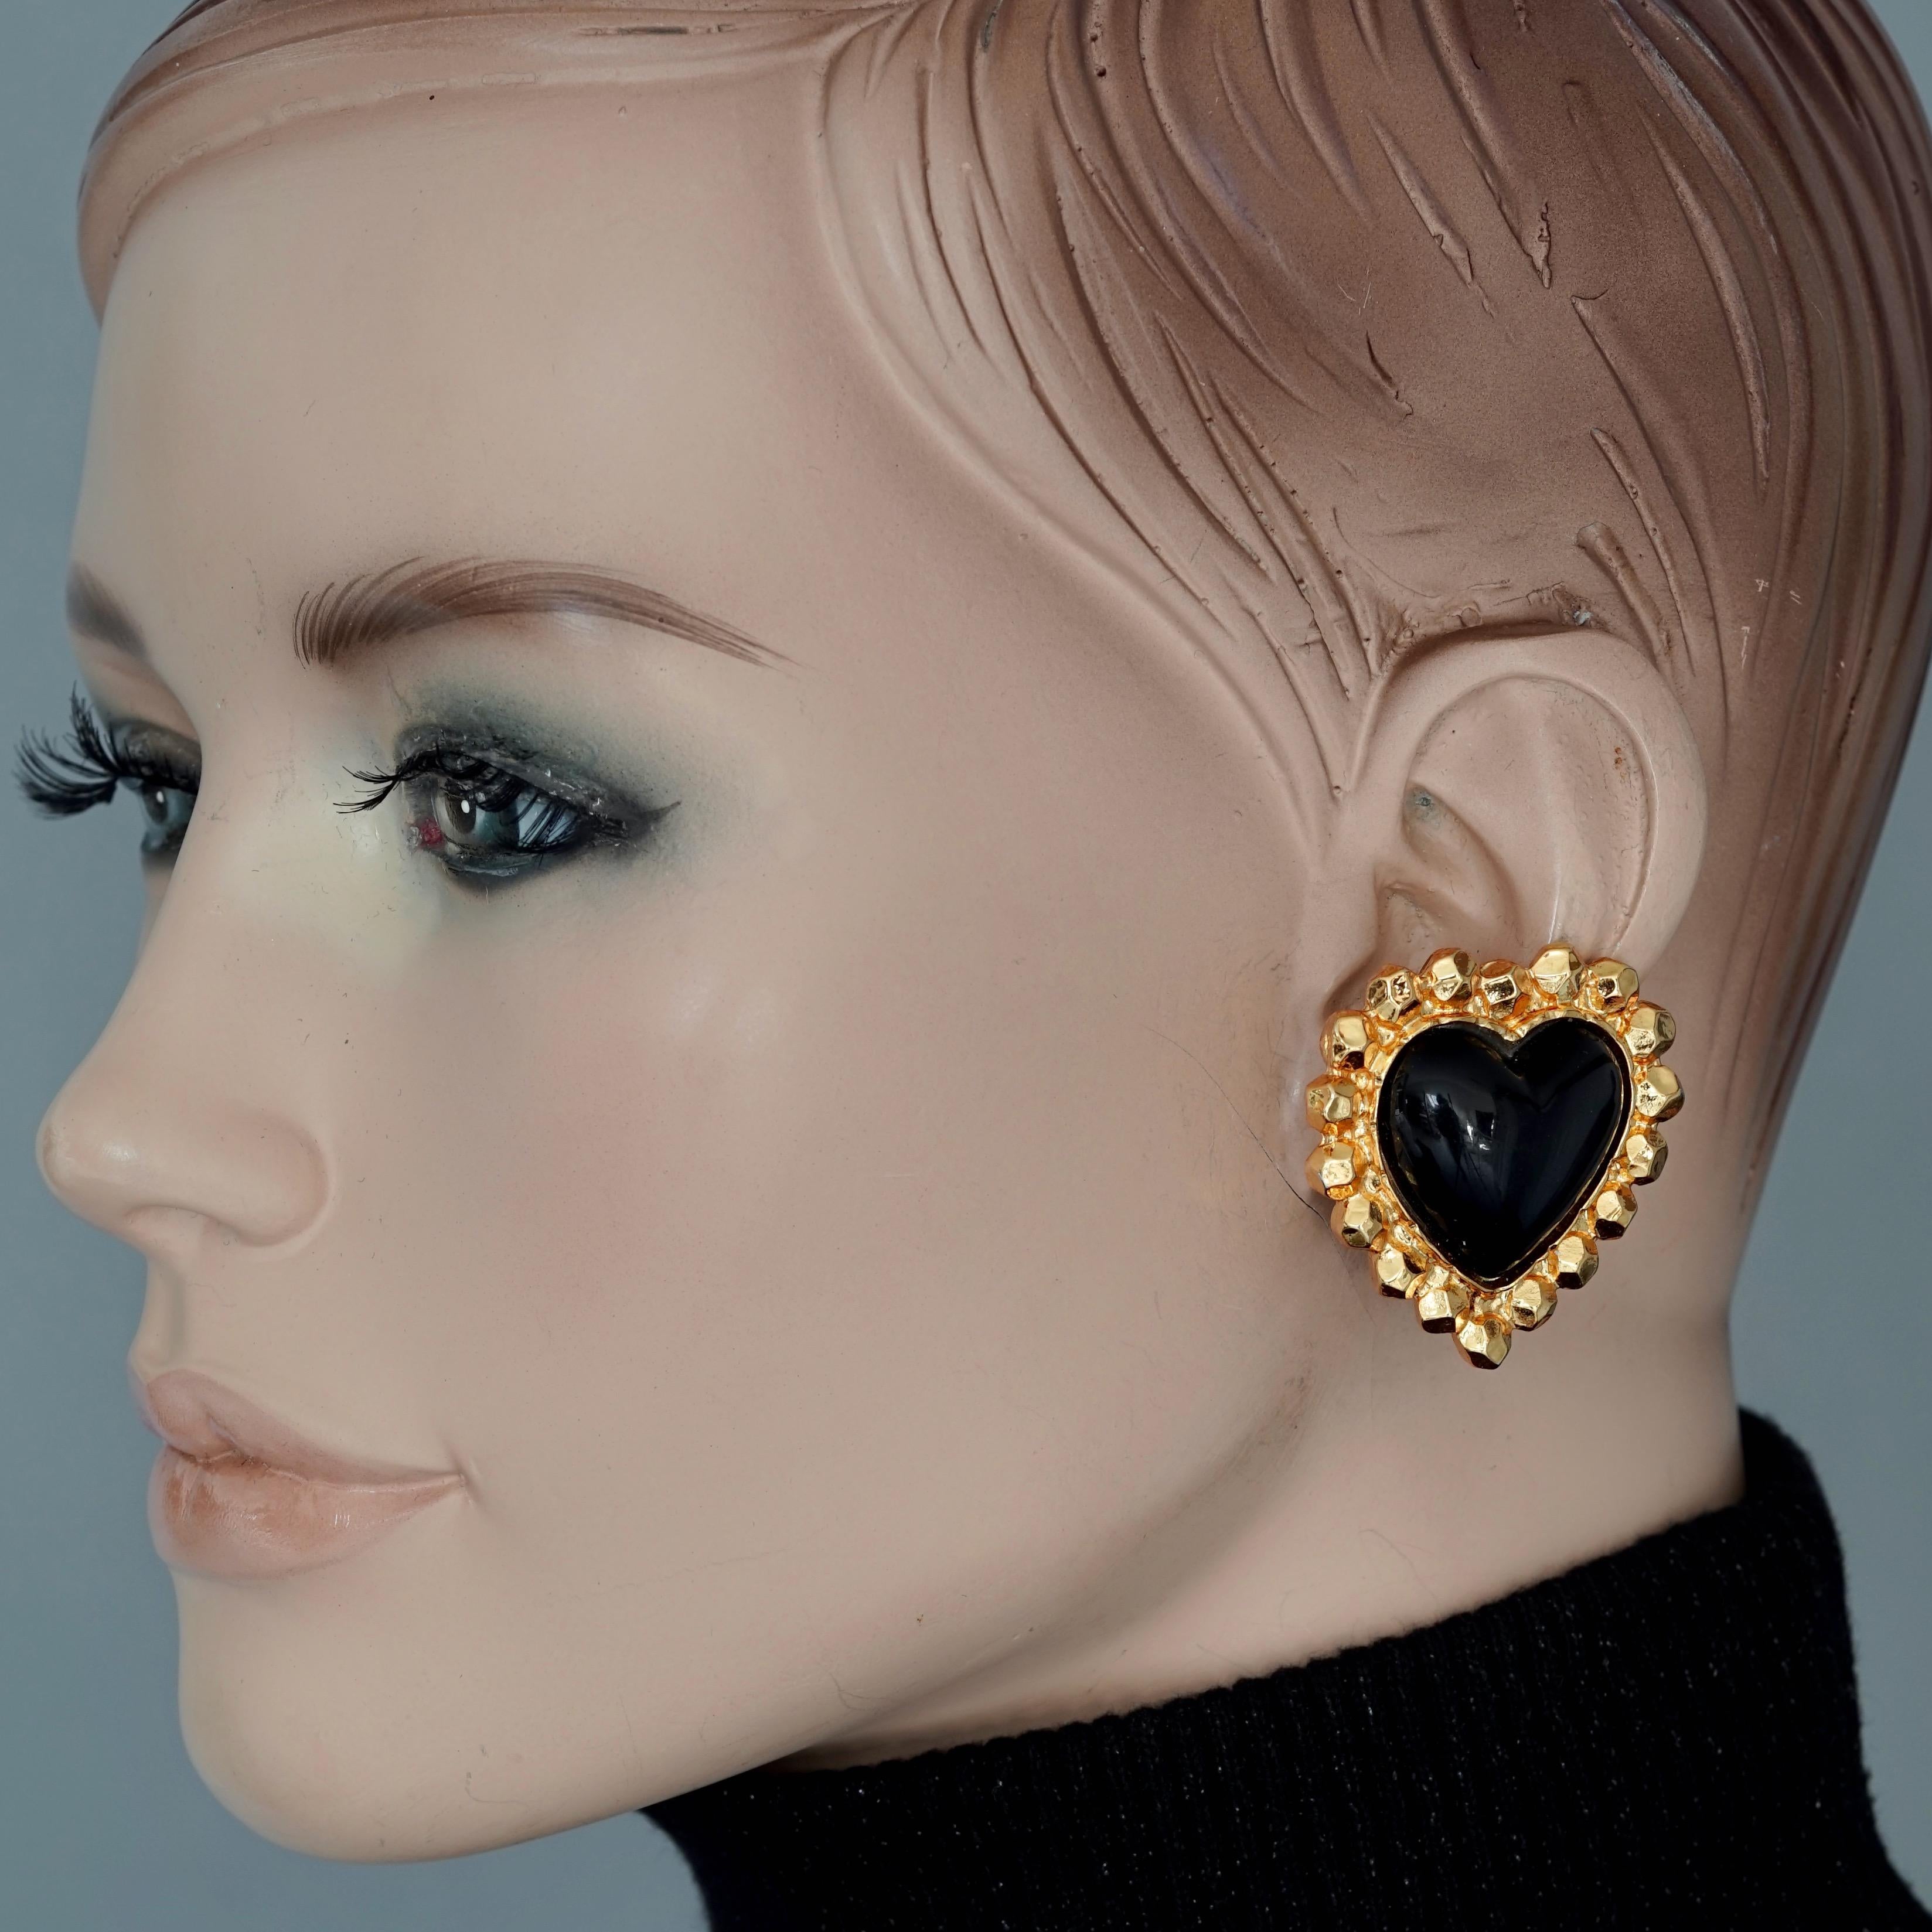 Vintage EDOUARD RAMBAUD Black Heart Earrings

Measurements:
Height: 1.57 inches (4 cm)
Width: 1.49 inches (3.8 cm)
Weight per Earring: 16 grams

Features:
- 100% Authentic EDOUARD RAMBAUD.
- Black resin heart earrings.
- Gold tone hardware.
- Clip